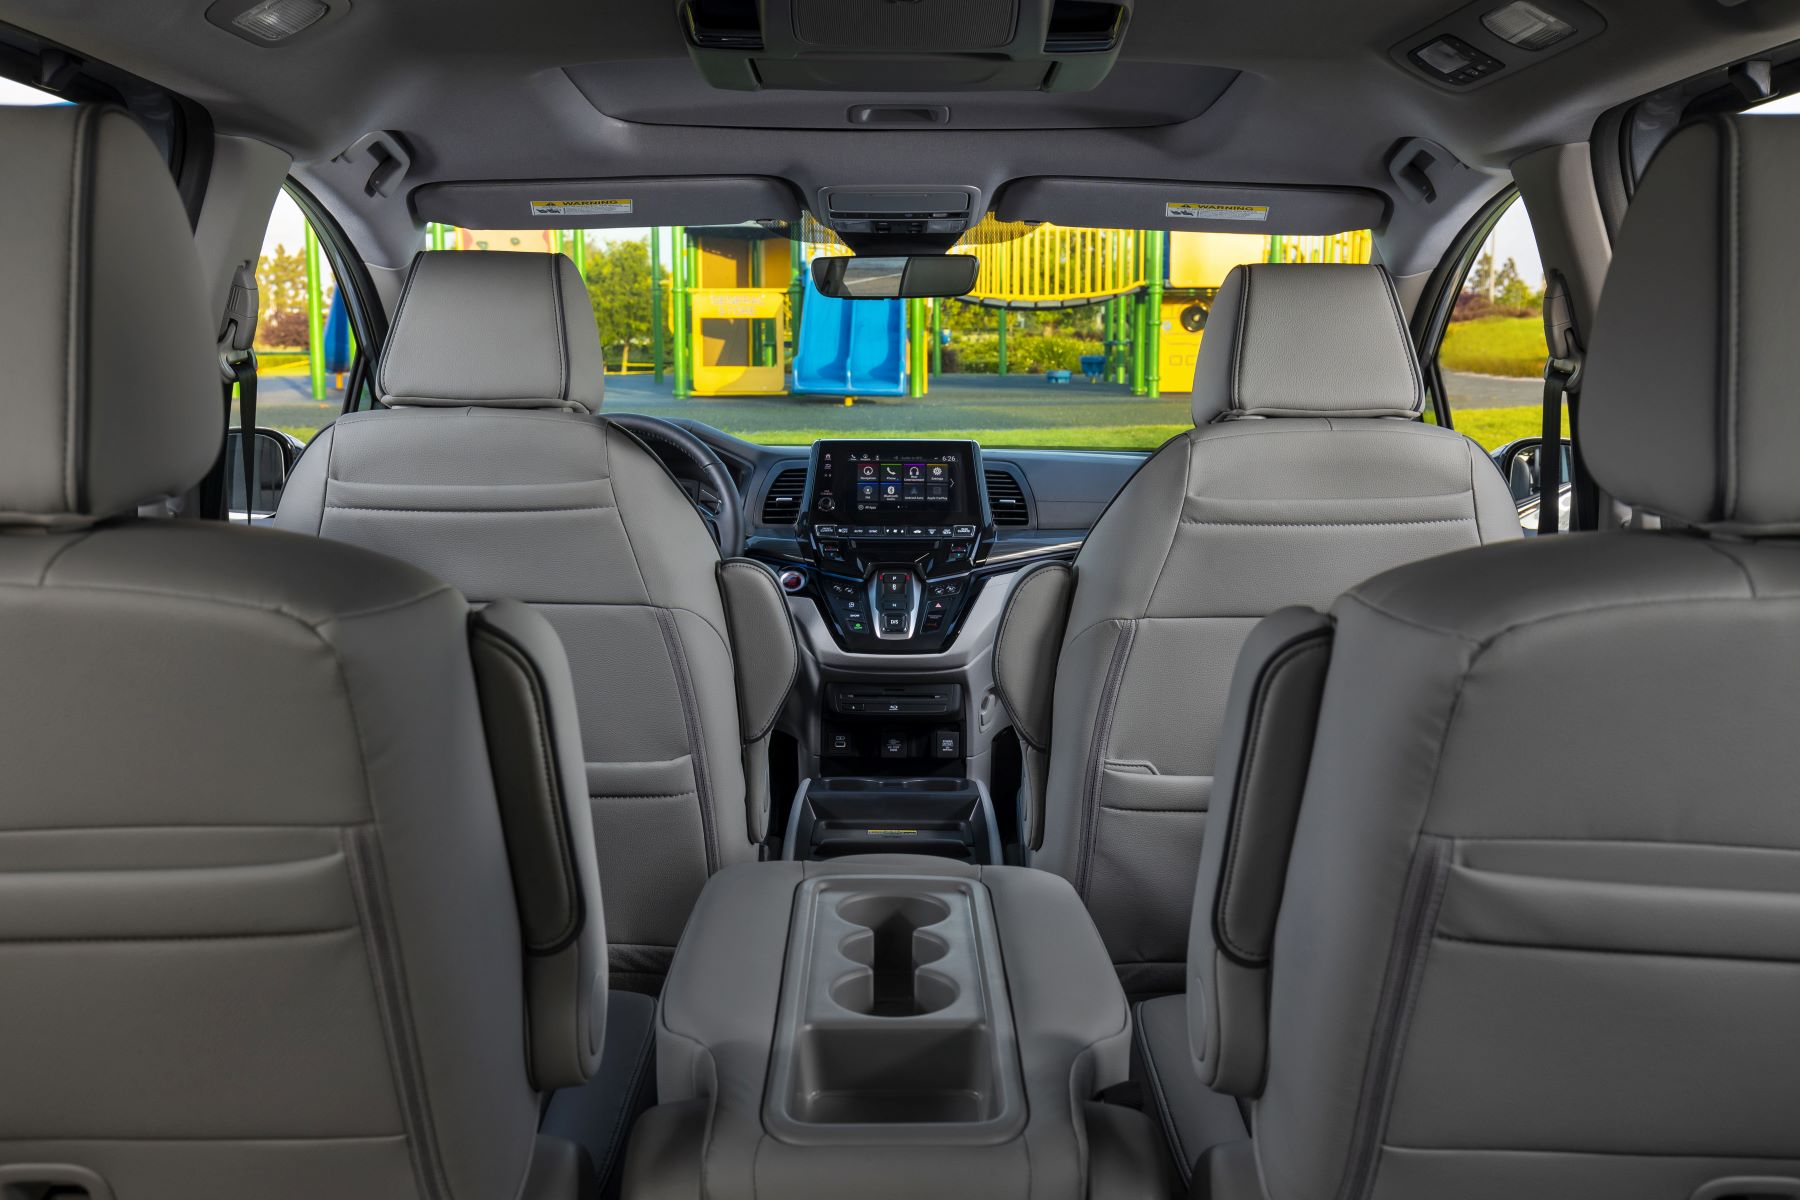 The cabin interior and seating layout of the 2023 Honda Odyssey minivan